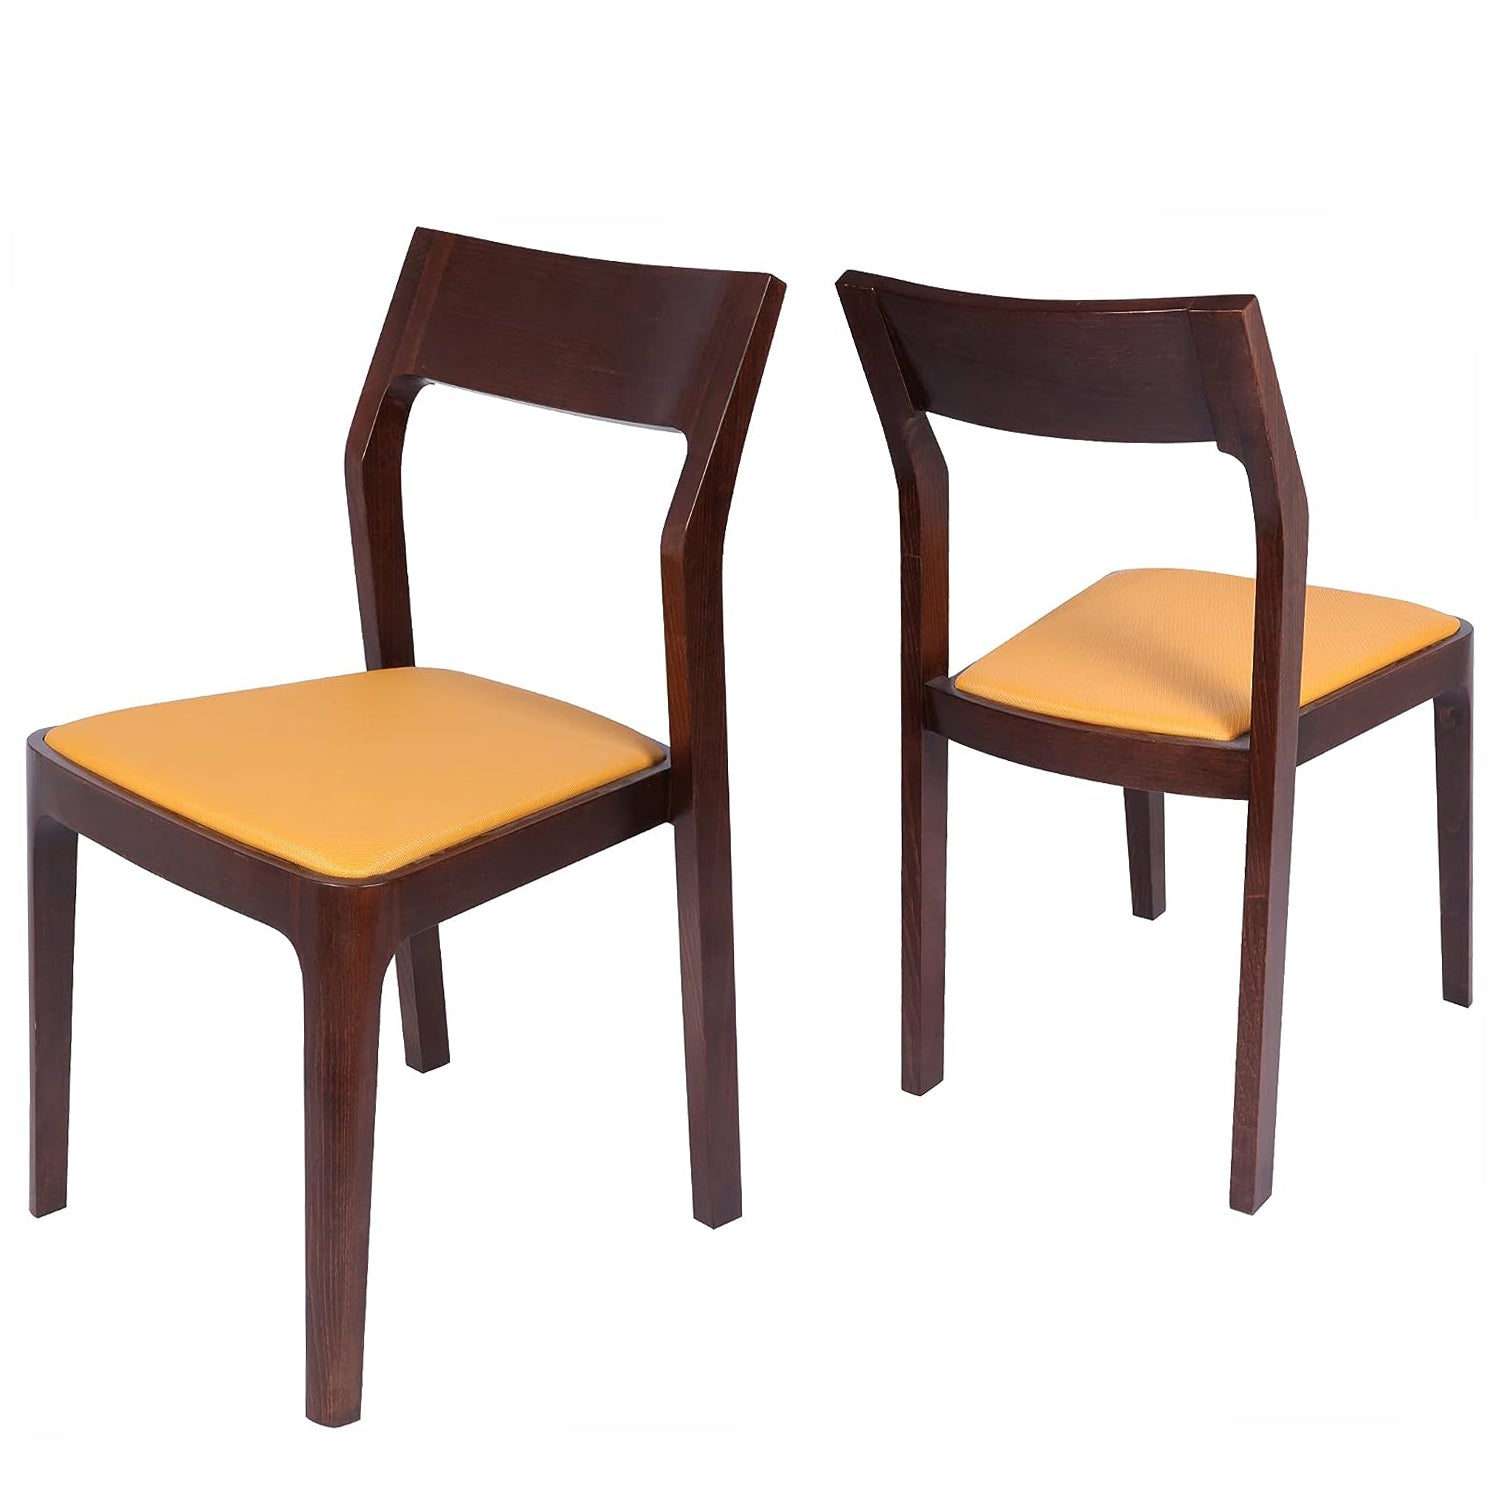 Set of 2 Dining Chairs Mid Century Upholstered Side Chairs with Beech Wood Frame